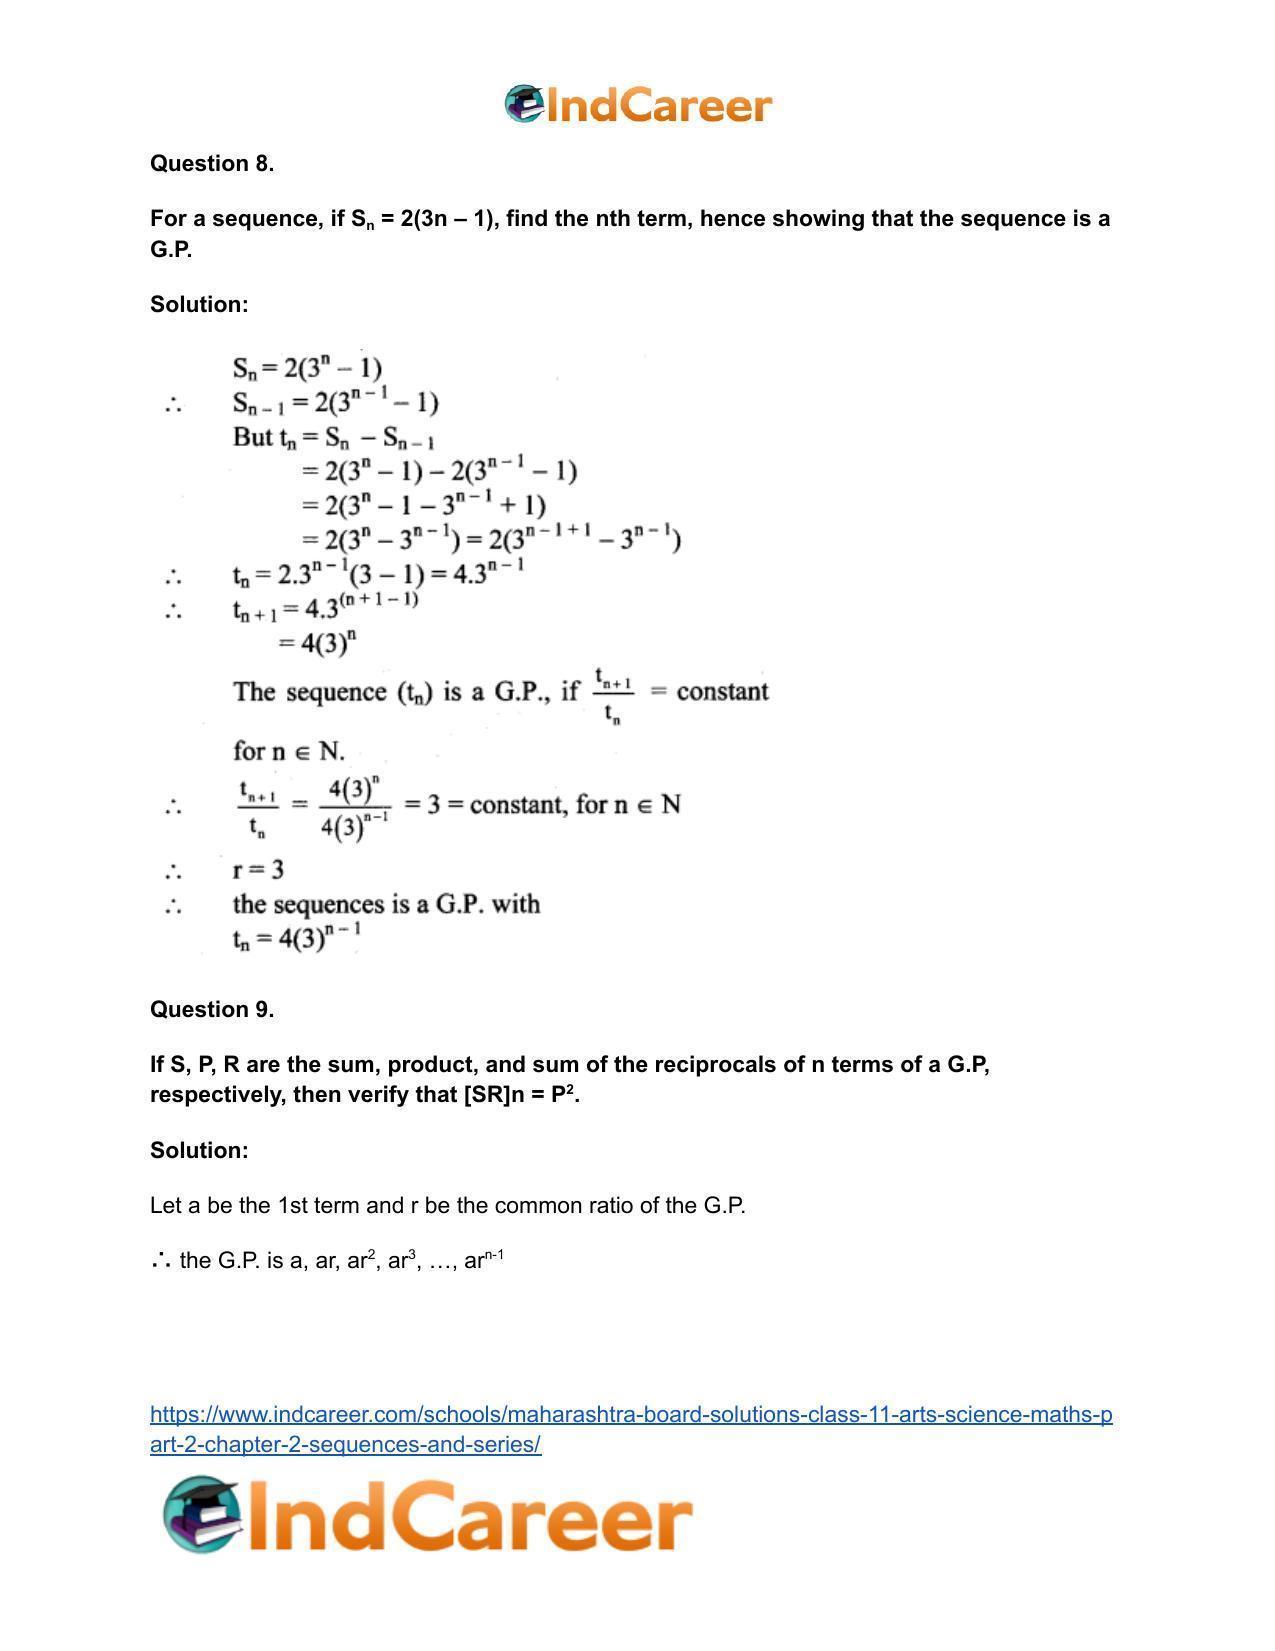 Maharashtra Board Solutions Class 11-Arts & Science Maths (Part 2): Chapter 2- Sequences and Series - Page 33